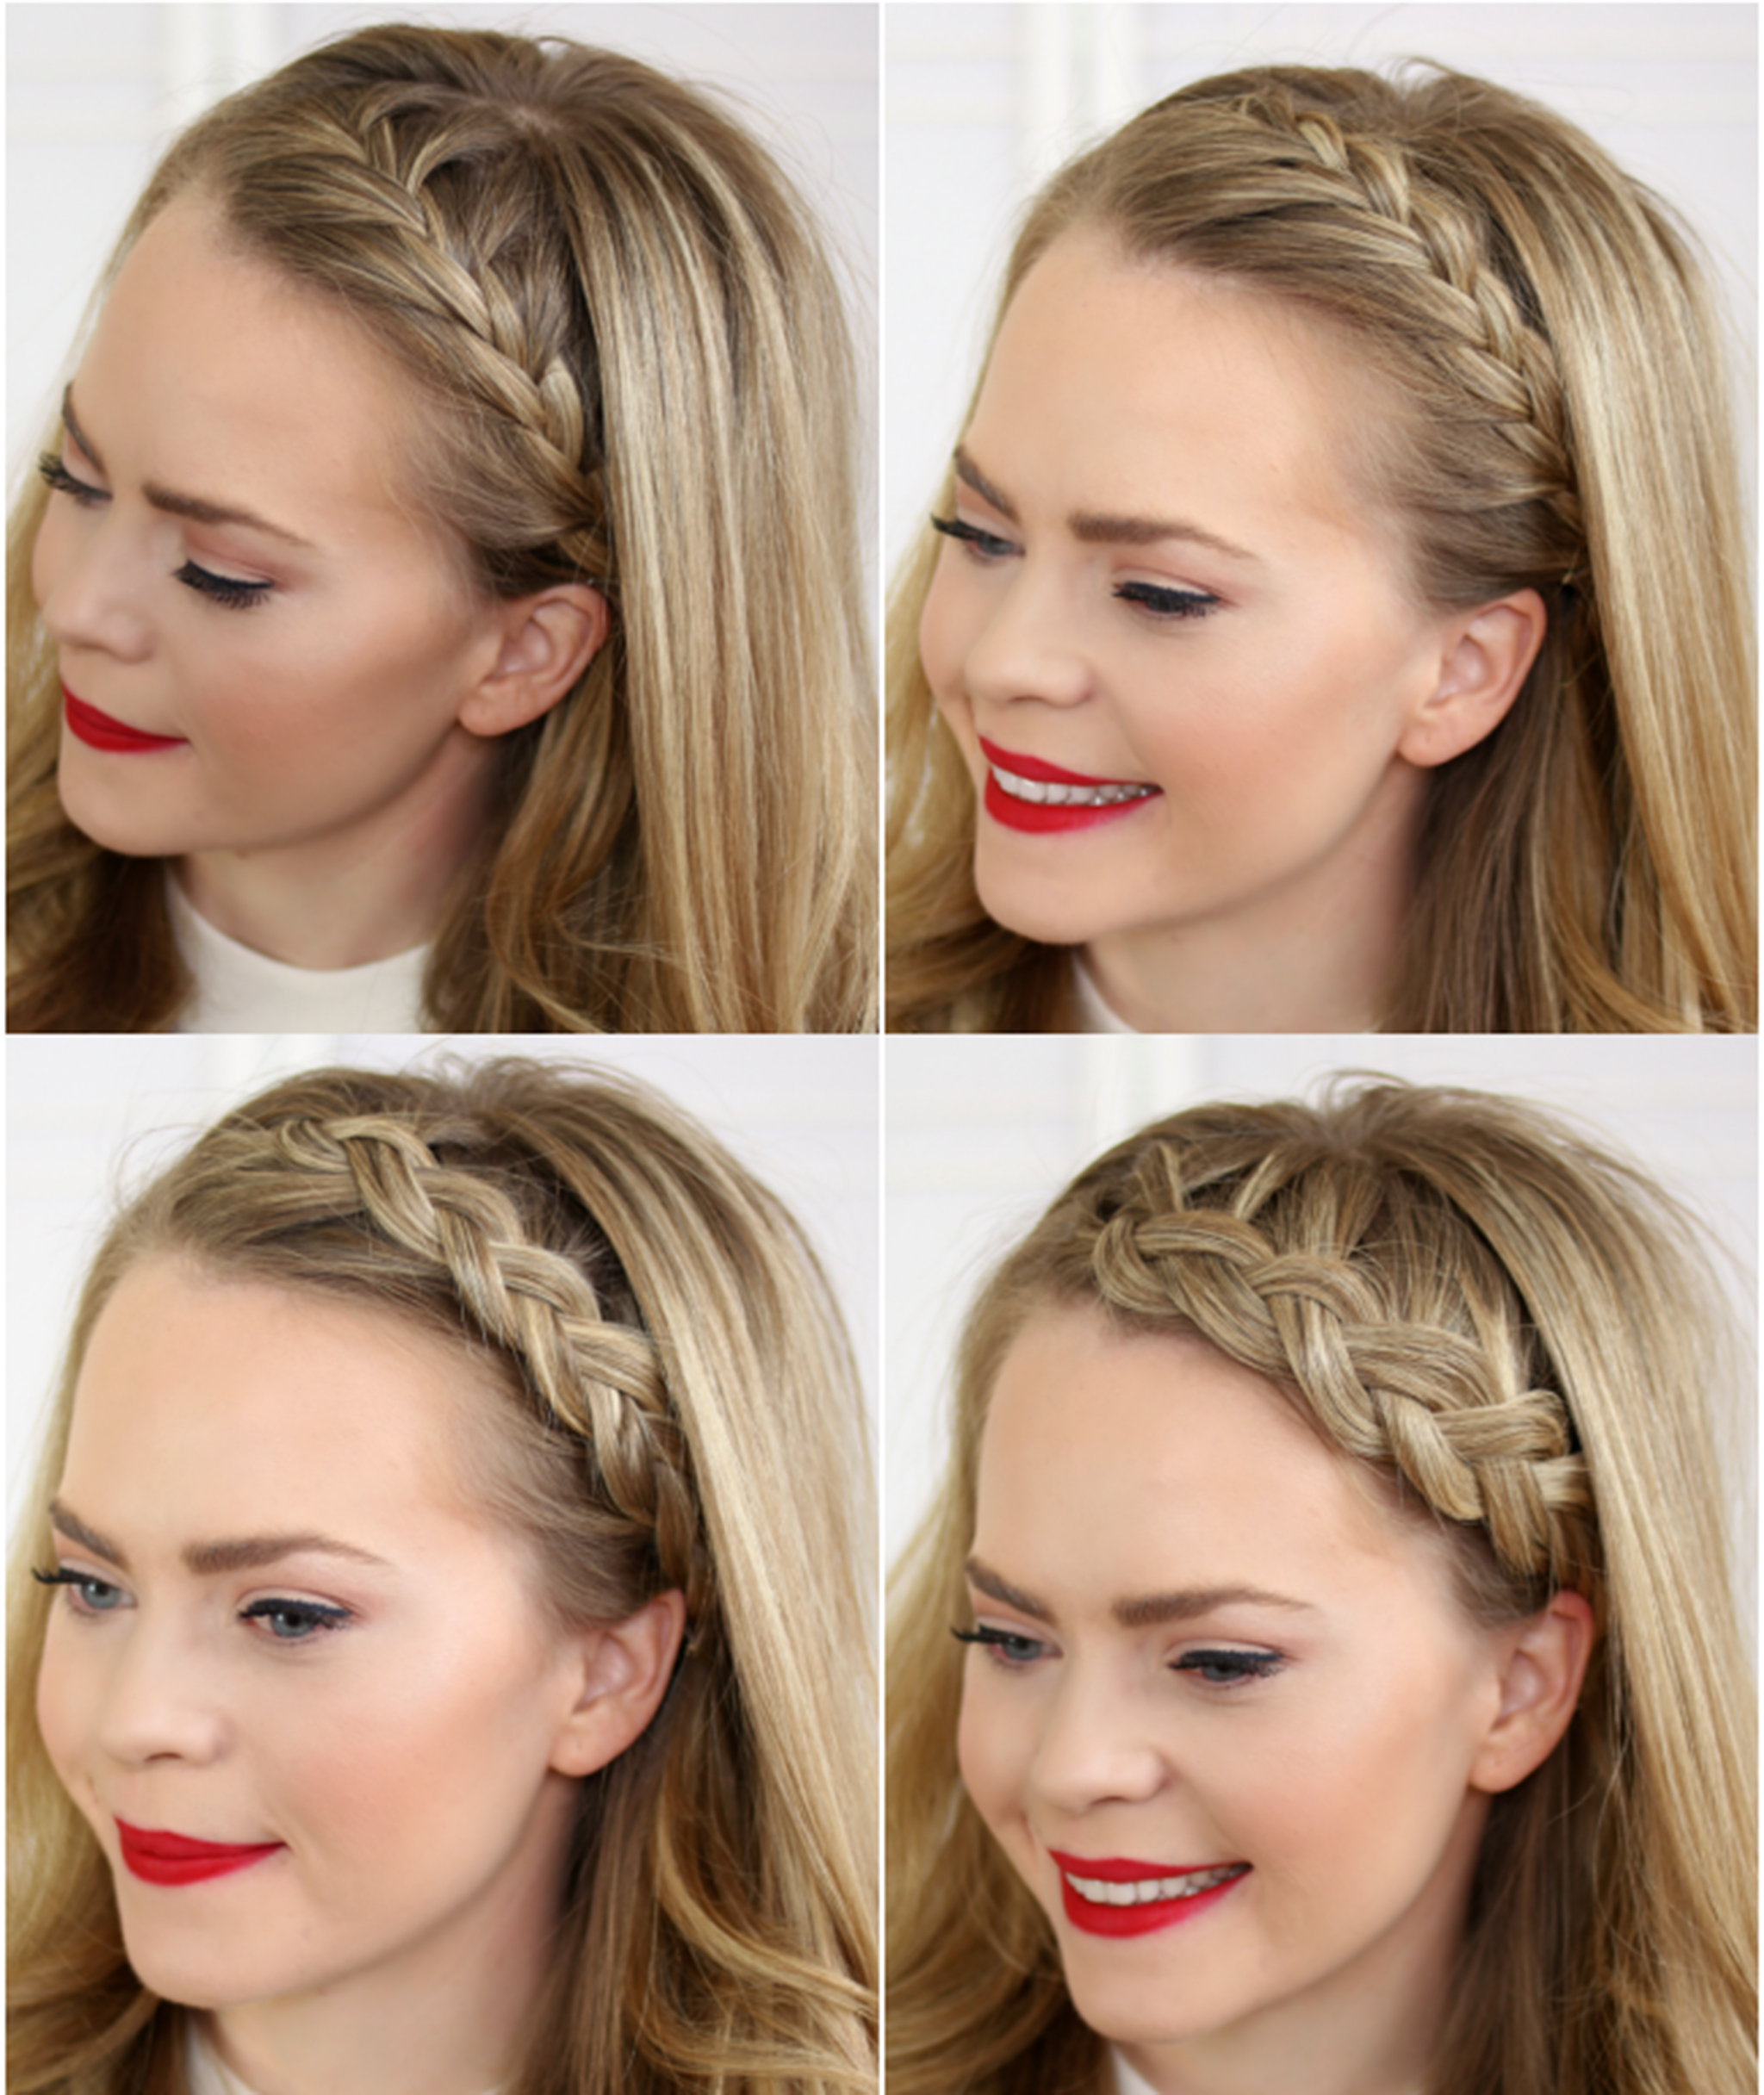 Top 10 Quick & Easy Braided Hairstyles Step By Step - Hairstyles Tutorials | Gymbuddy Now